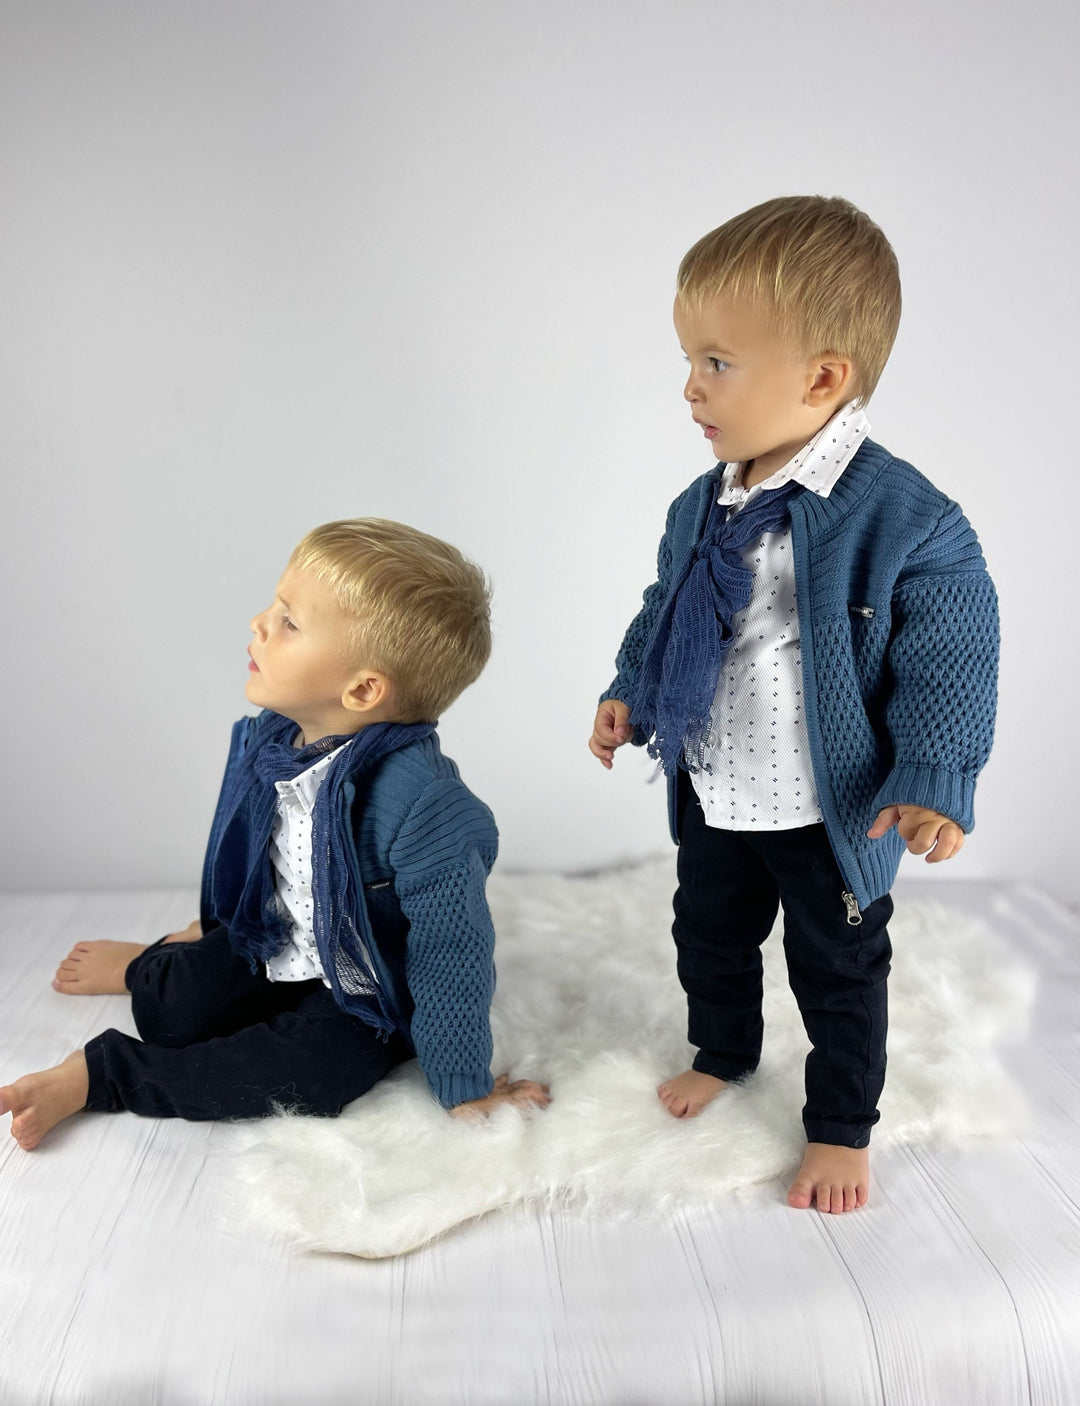 Formal boys suit, stylish boy outfit, boy's navy blue cardigan,  fall sweater,first birthday boy outfit,fall toddler boy dressy outfit,